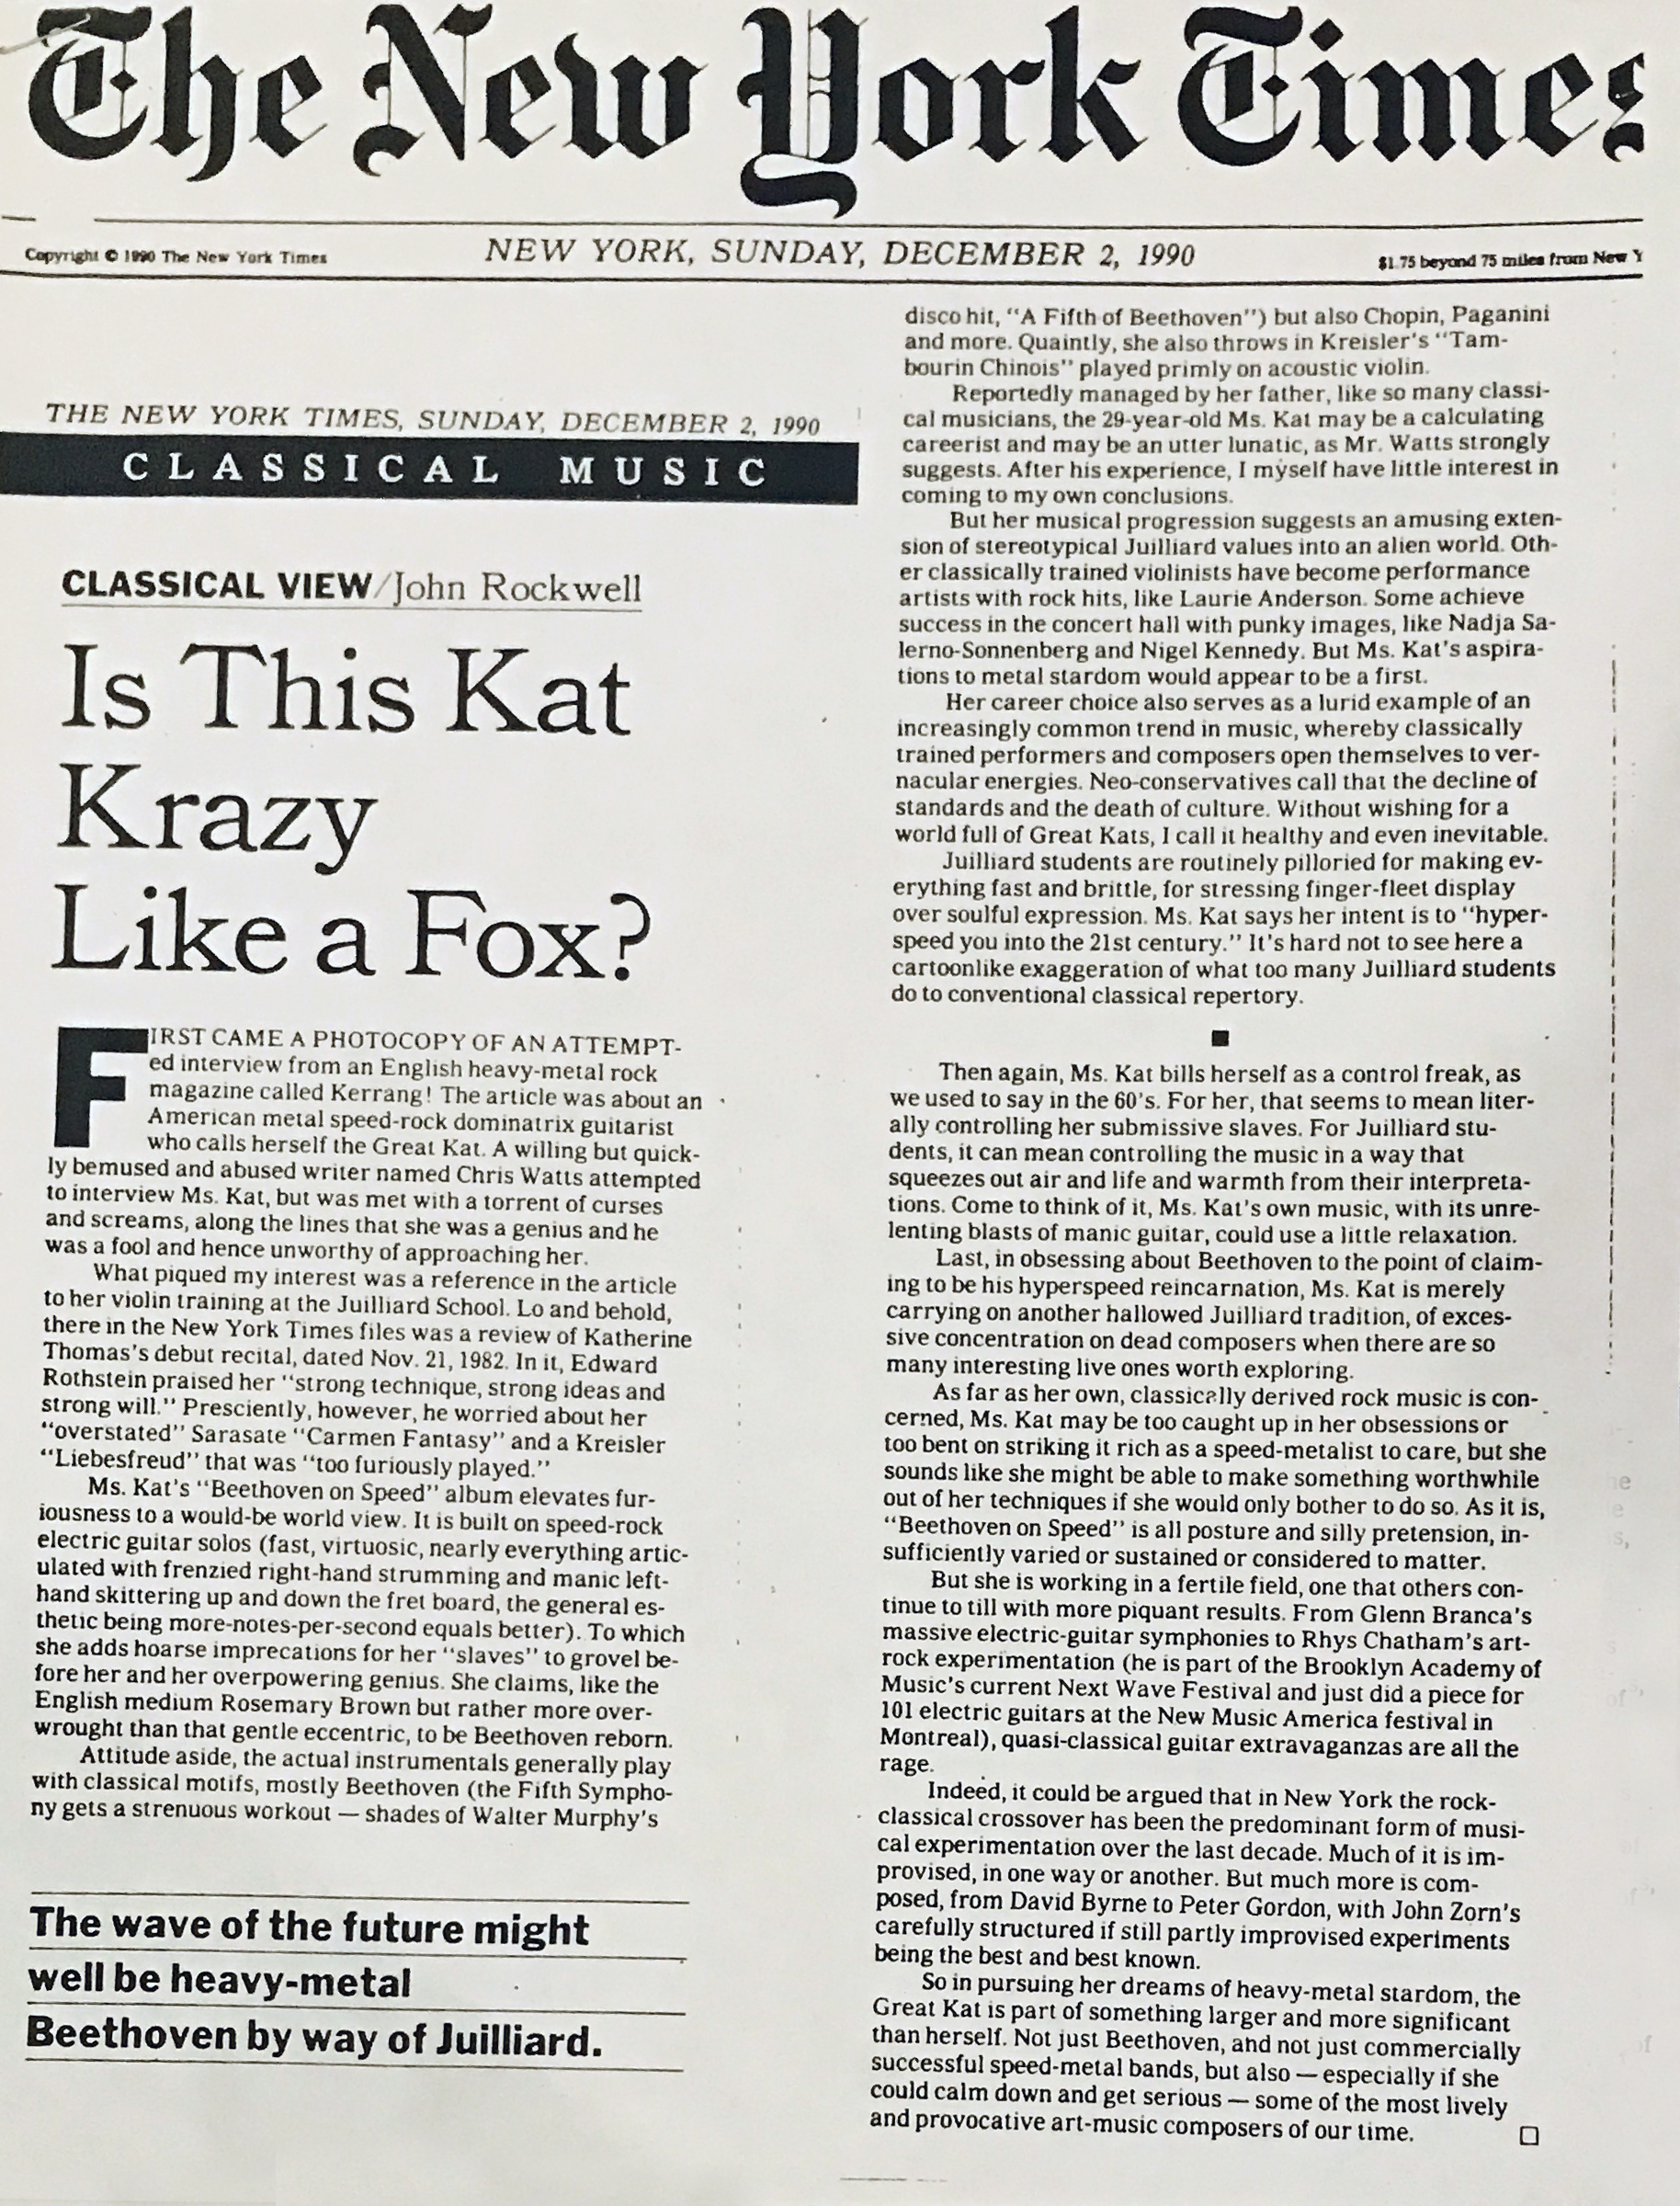 THE NEW YORK TIMES CLASSICAL MUSIC FEATURE on THE GREAT KAT! "IS THIS KAT KRAZY LIKE A FOX?" by JOHN ROCKWELL! 